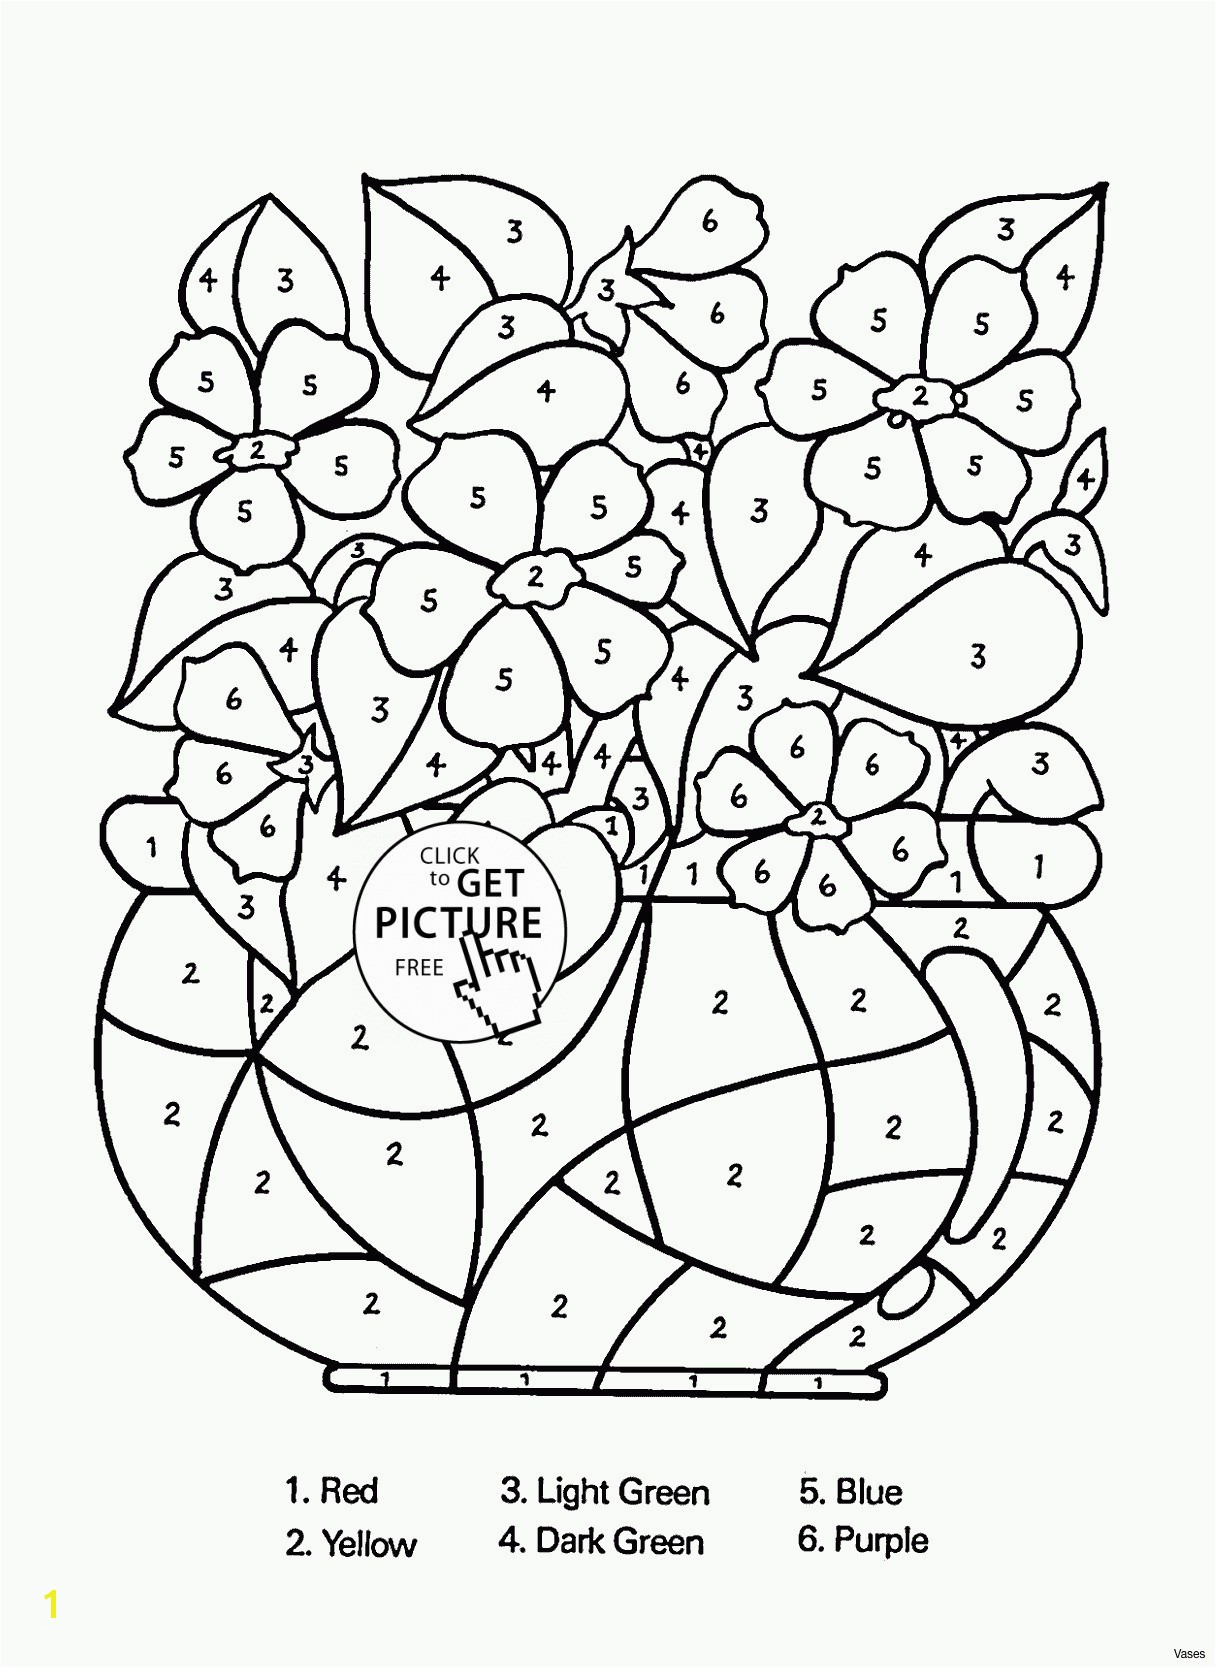 Free Printable Coloring Pages for toddlers Free Printable Coloring Pages for Kids Printable Kids Coloring Pages